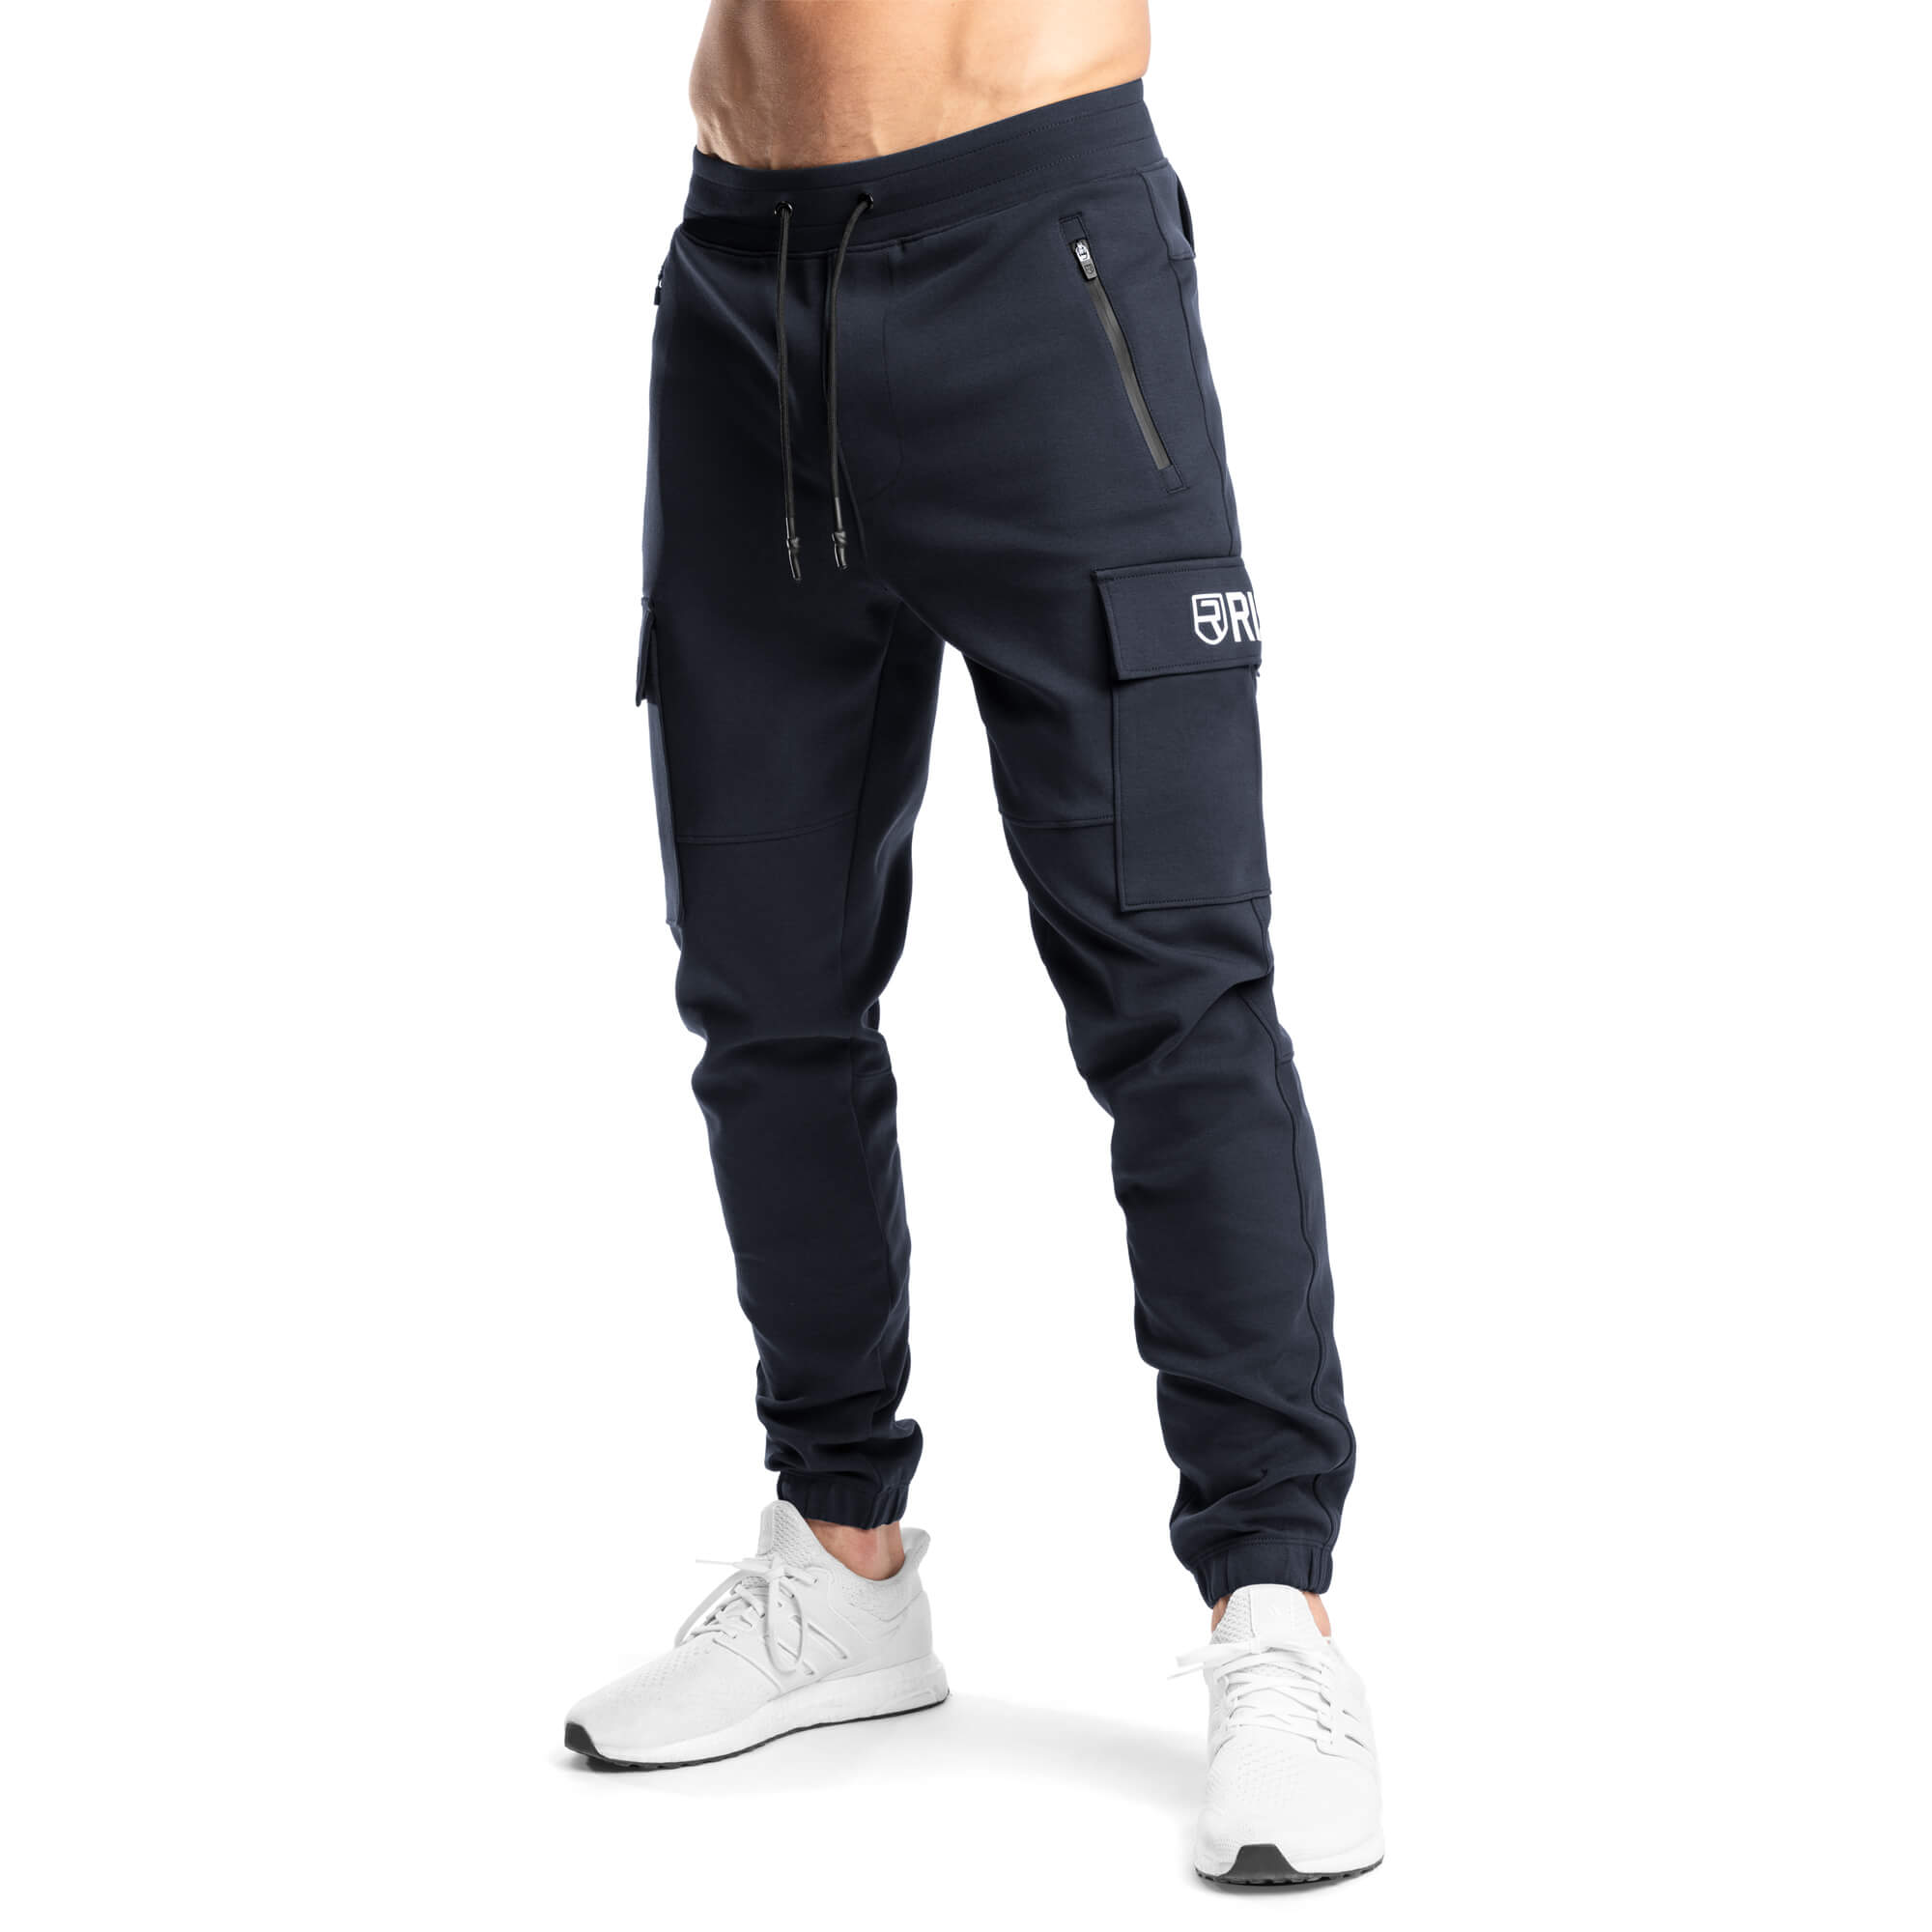 Rest Later Pants - Charcoal Marl - Rise Canada